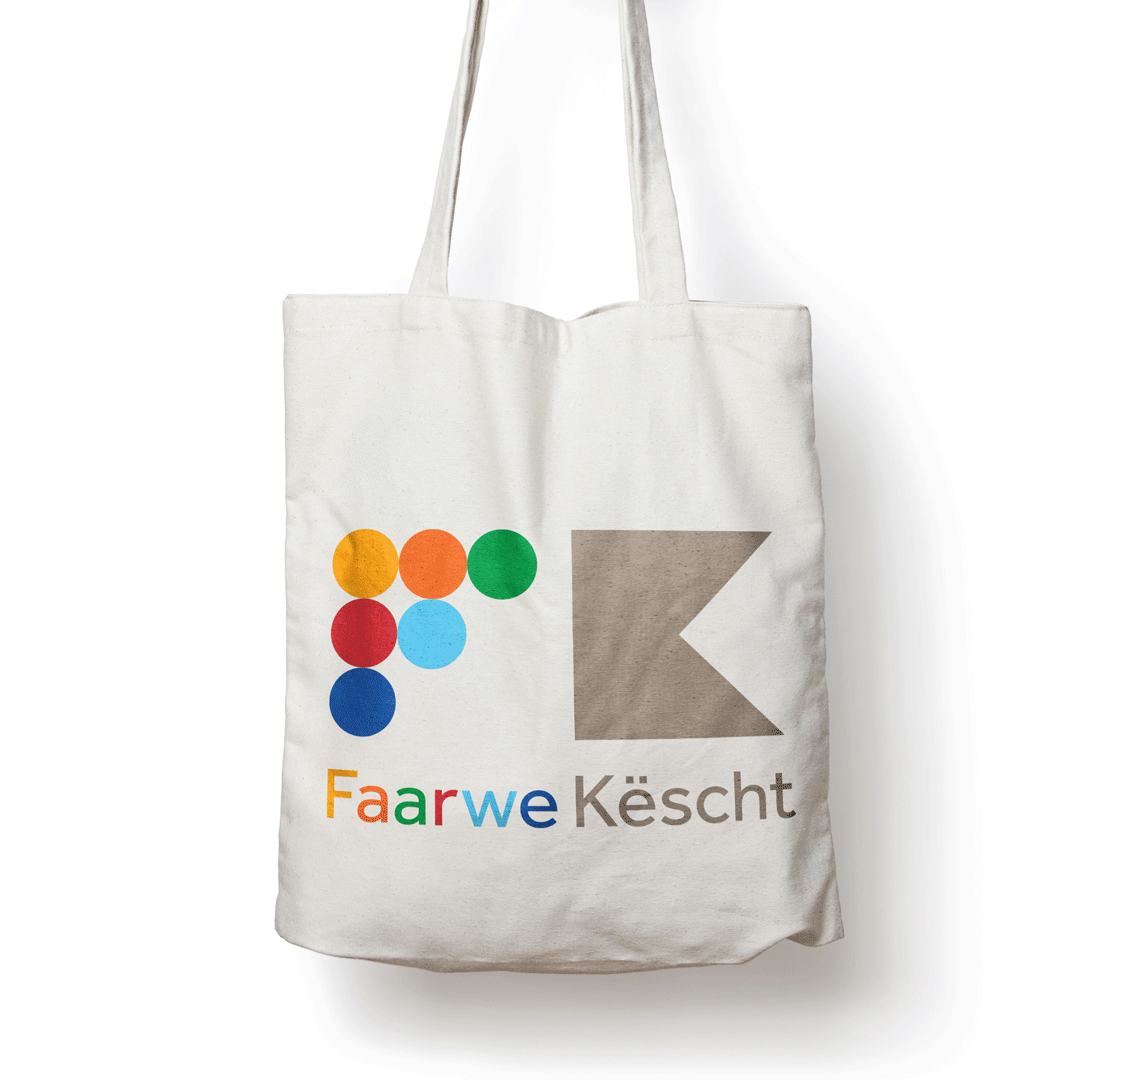 Animation of a jute bag with logo and a bag with playful illustrations from the brand identity